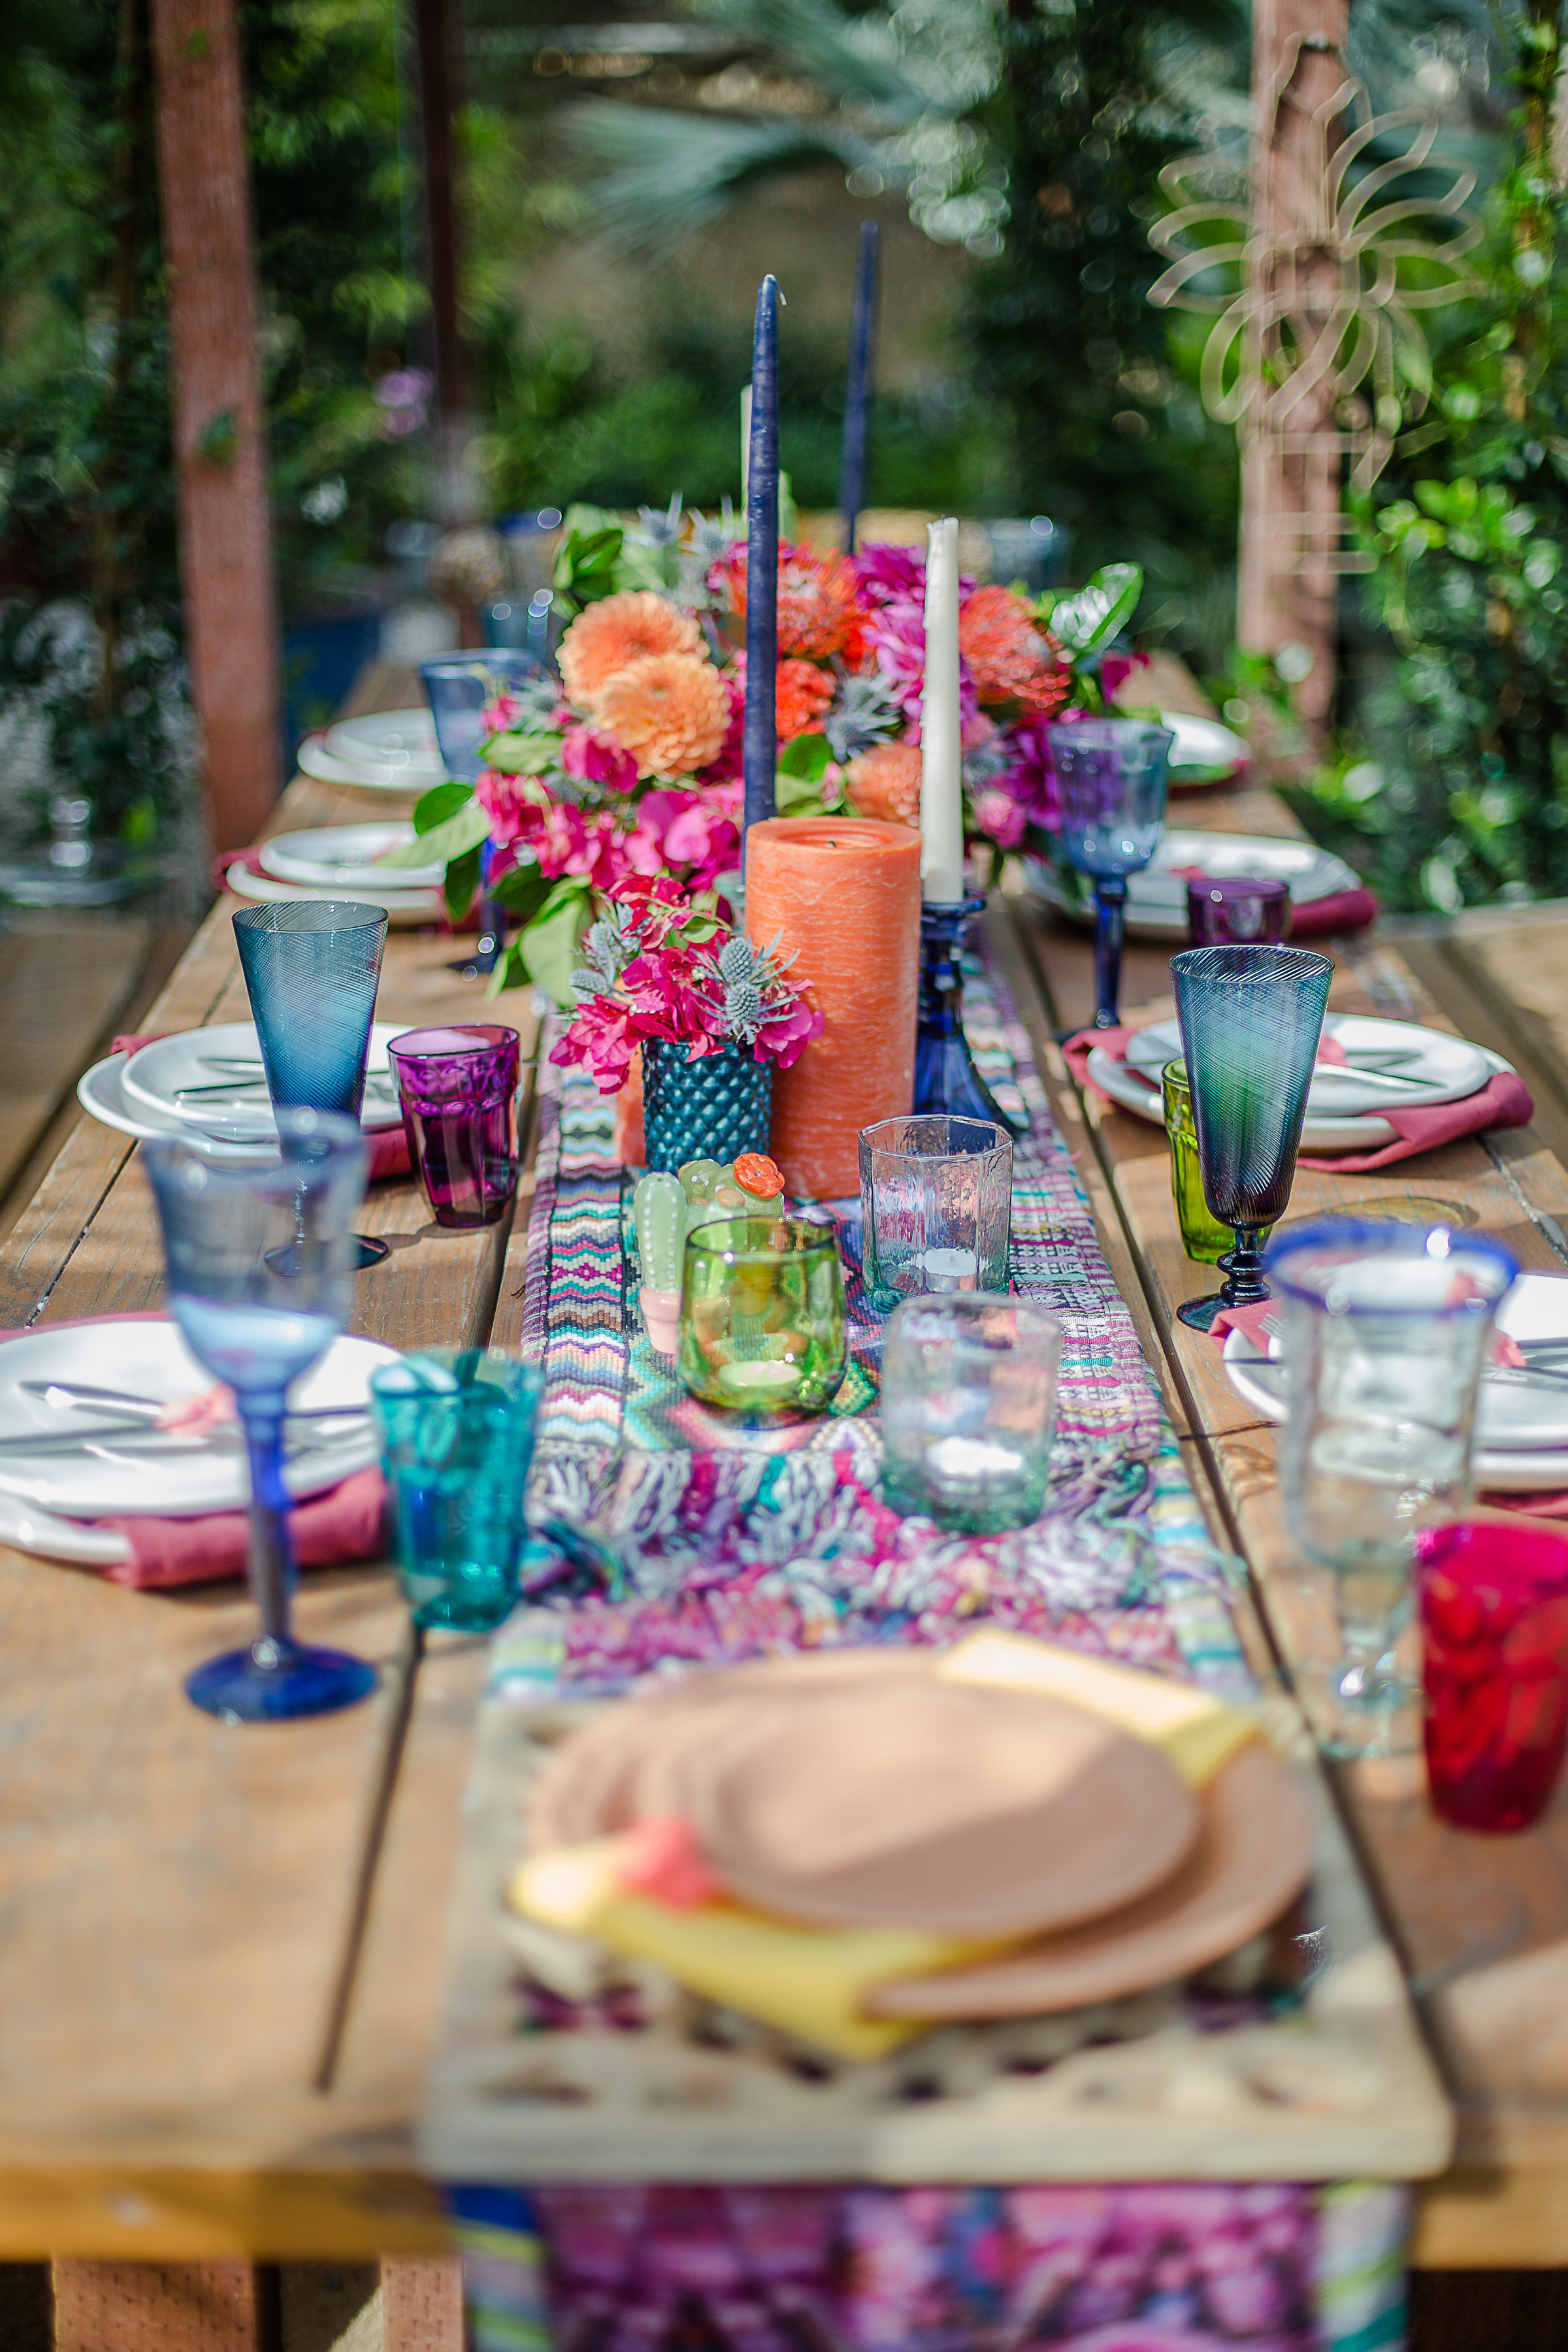 Bright and colorful 5 de Mayo backyard brunch celebration idea. // Get inspired with these Elegant Mexican Fiesta / Cinco de Mayo Themed Bridal Shower Ideas. // mysweetengagement.com